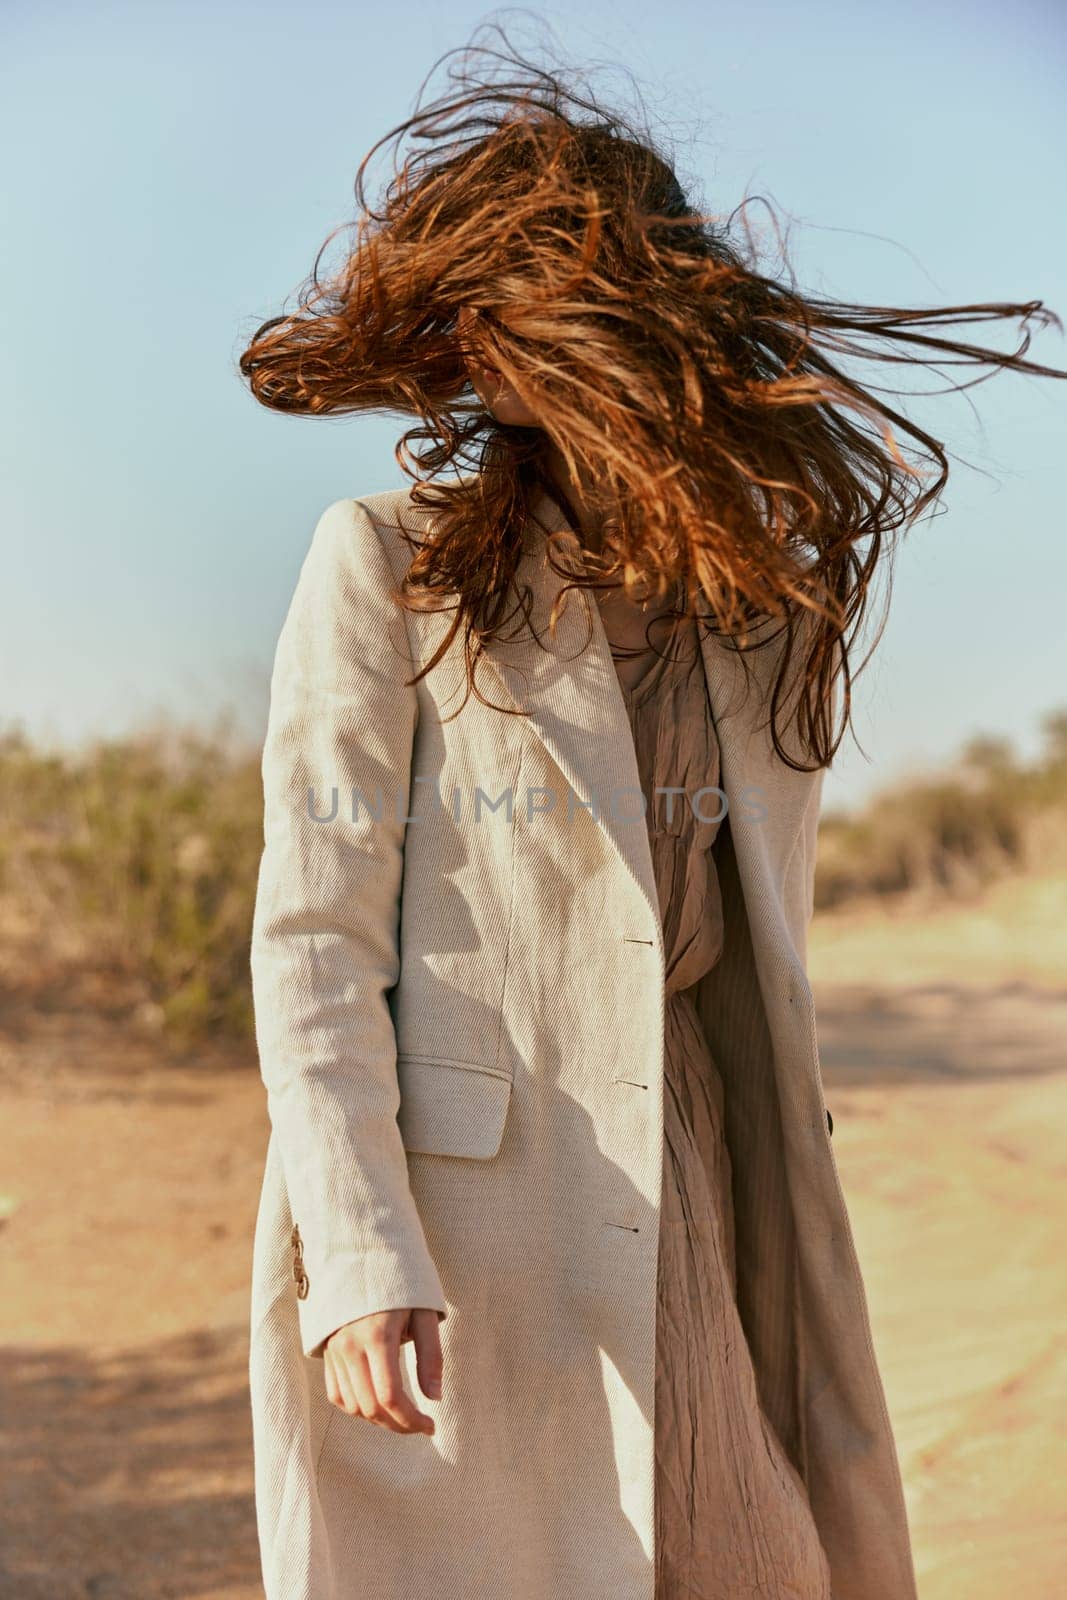 custom portrait of a woman in a light coat with red hair covering her face. High quality photo